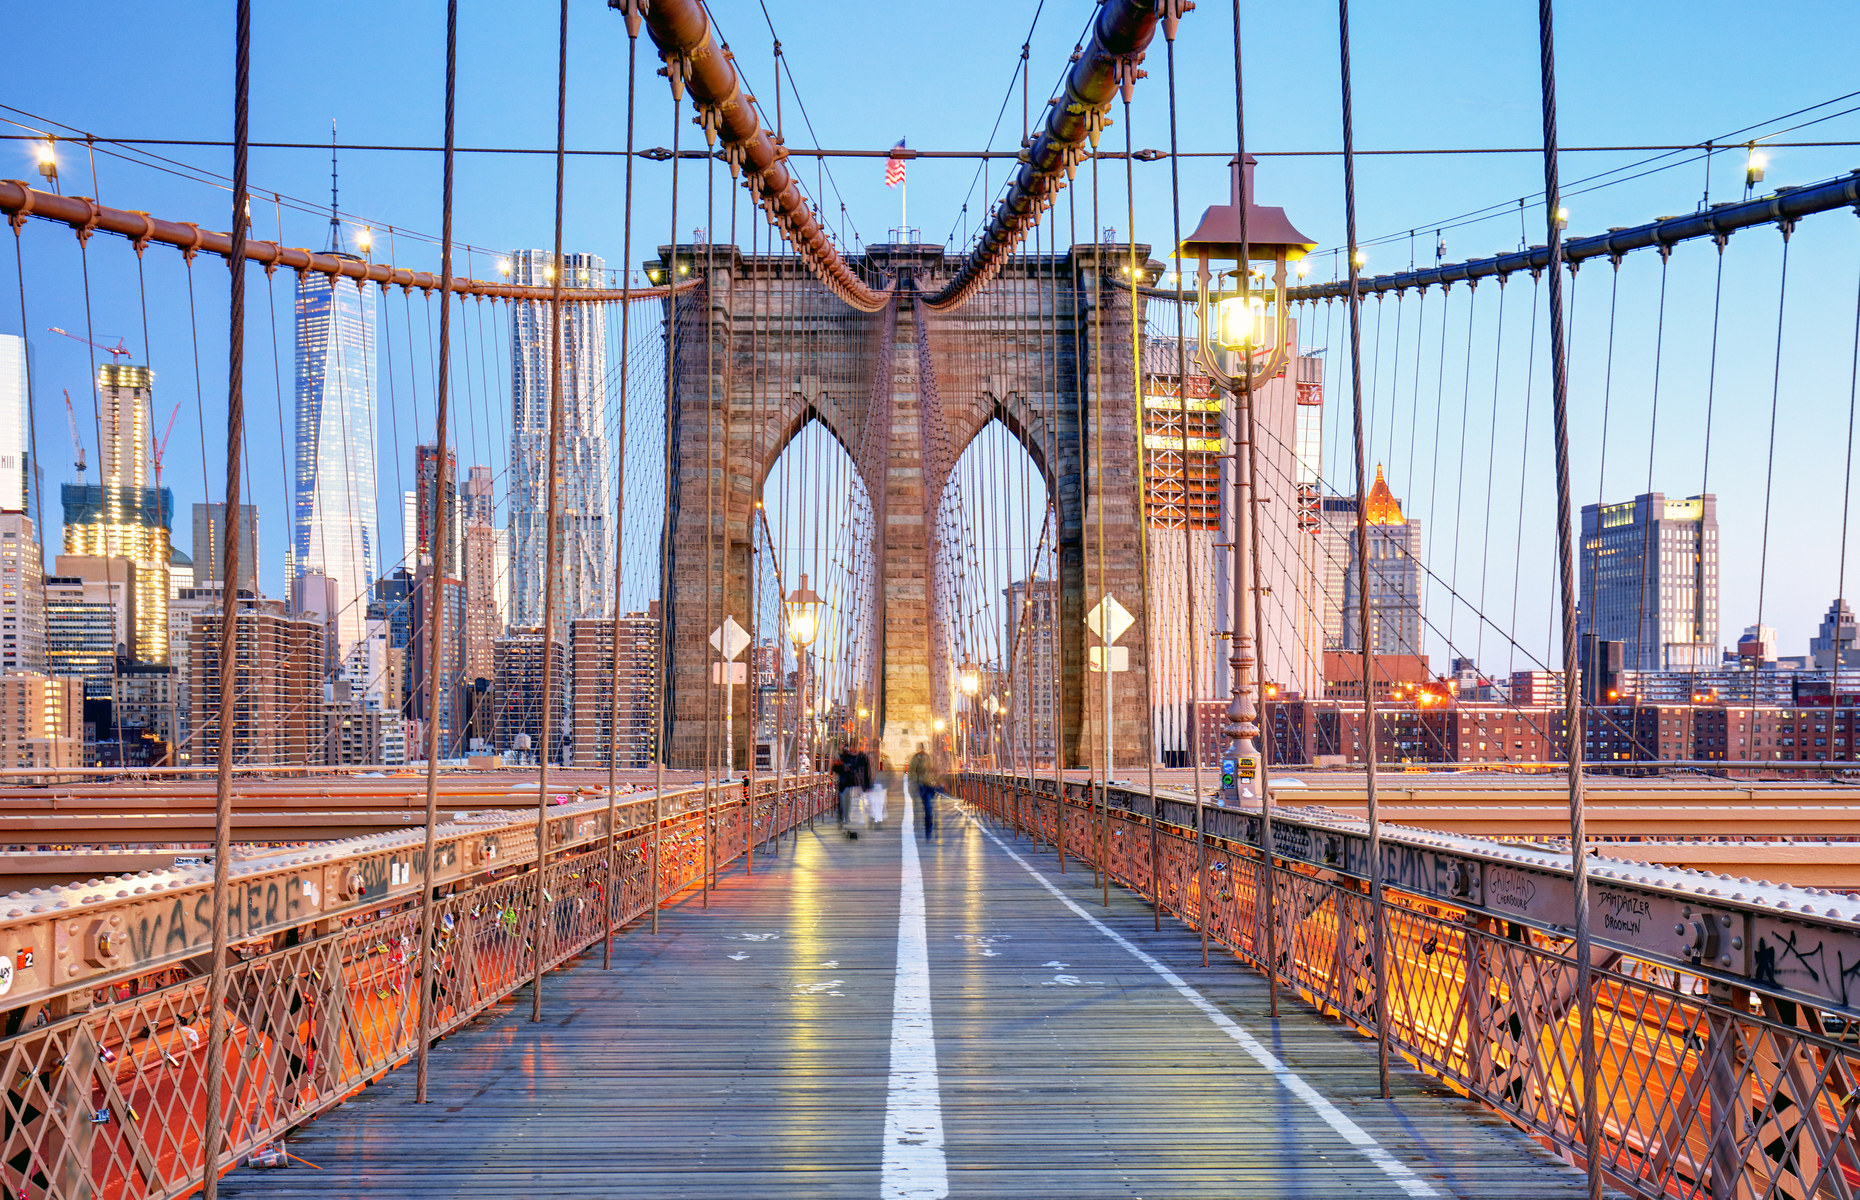 <p>When isn’t a good time to visit the Big Apple? New York City was ranked the No. 3 city in the world by <a href="https://www.newswire.ca/news-releases/resonance-consultancy-reveals-the-2023-world-s-best-cities-875804710.html" title="https://www.newswire.ca/news-releases/resonance-consultancy-reveals-the-2023-world-s-best-cities-875804710.html">Resonance</a>, which looks at not just what it’s like for visitors but factors including livability (like walkability) and lovability (think Instagram hashtags). Whether it’s your first or fifth visit, there’s always something new to see and do in NYC, so head to <a href="https://www.metmuseum.org/" title="https://www.metmuseum.org/">The Met</a>, take a stroll across the Brooklyn Bridge, ride the elevator up the Empire State Building or dine out at one of the <a href="https://www.nytimes.com/interactive/2023/dining/best-nyc-restaurants.html" title="https://www.nytimes.com/interactive/2023/dining/best-nyc-restaurants.html">city’s best restaurants</a>.</p>